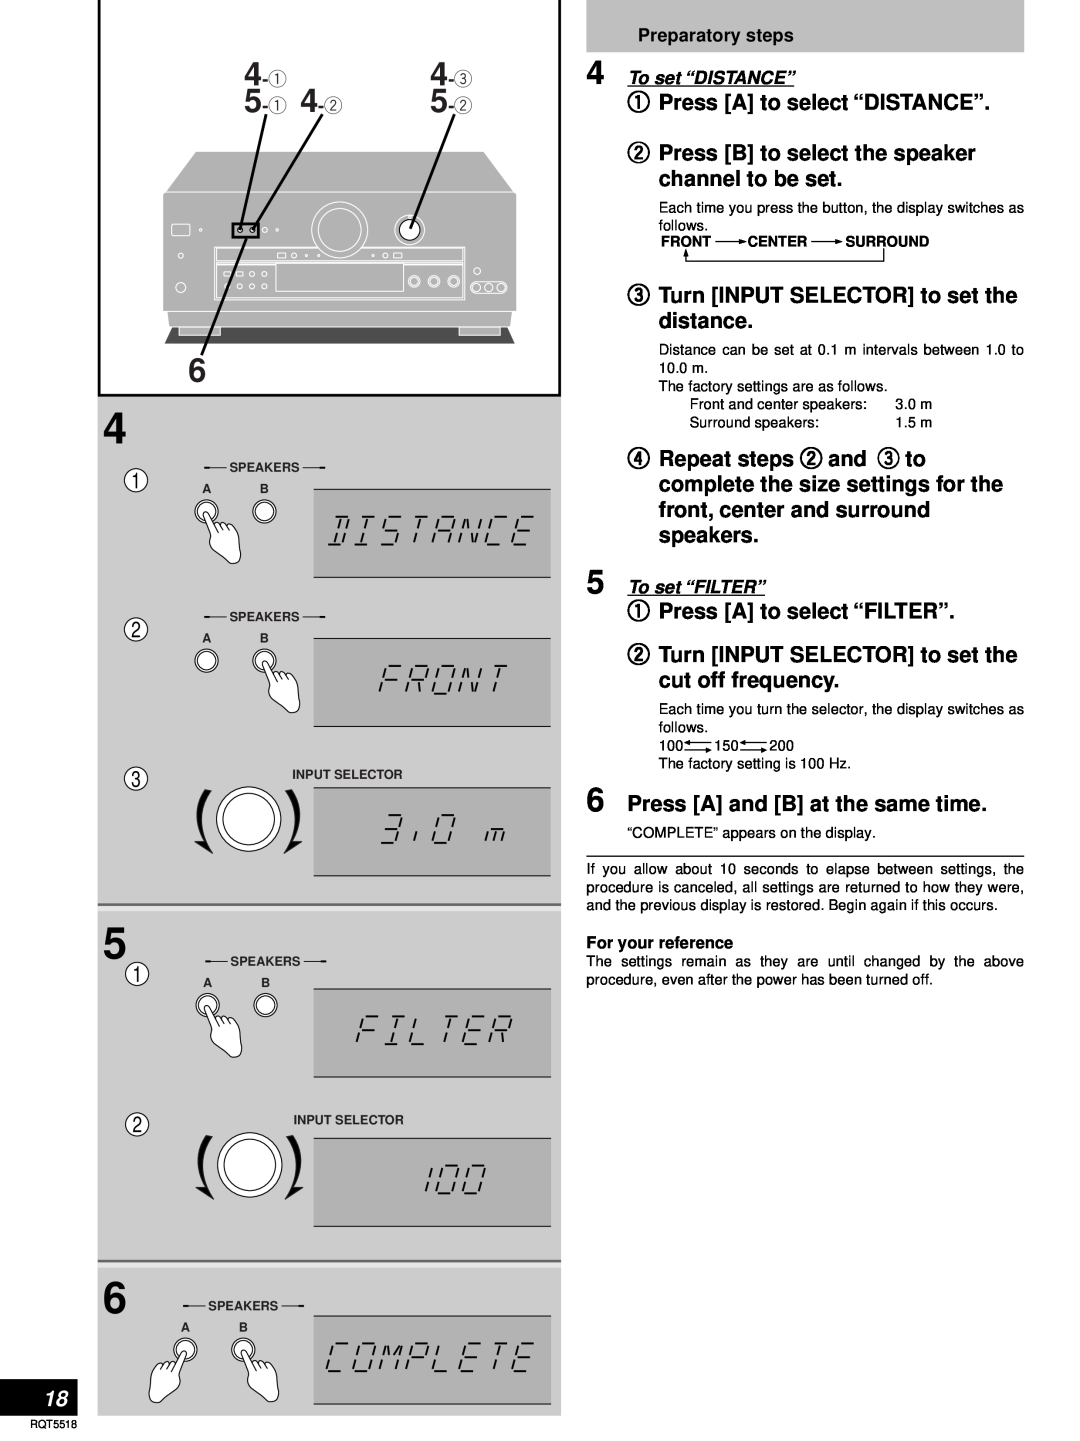 Technics SA-DA10 Press A to select “DISTANCE”, Press B to select the speaker, channel to be set, distance, speakers 